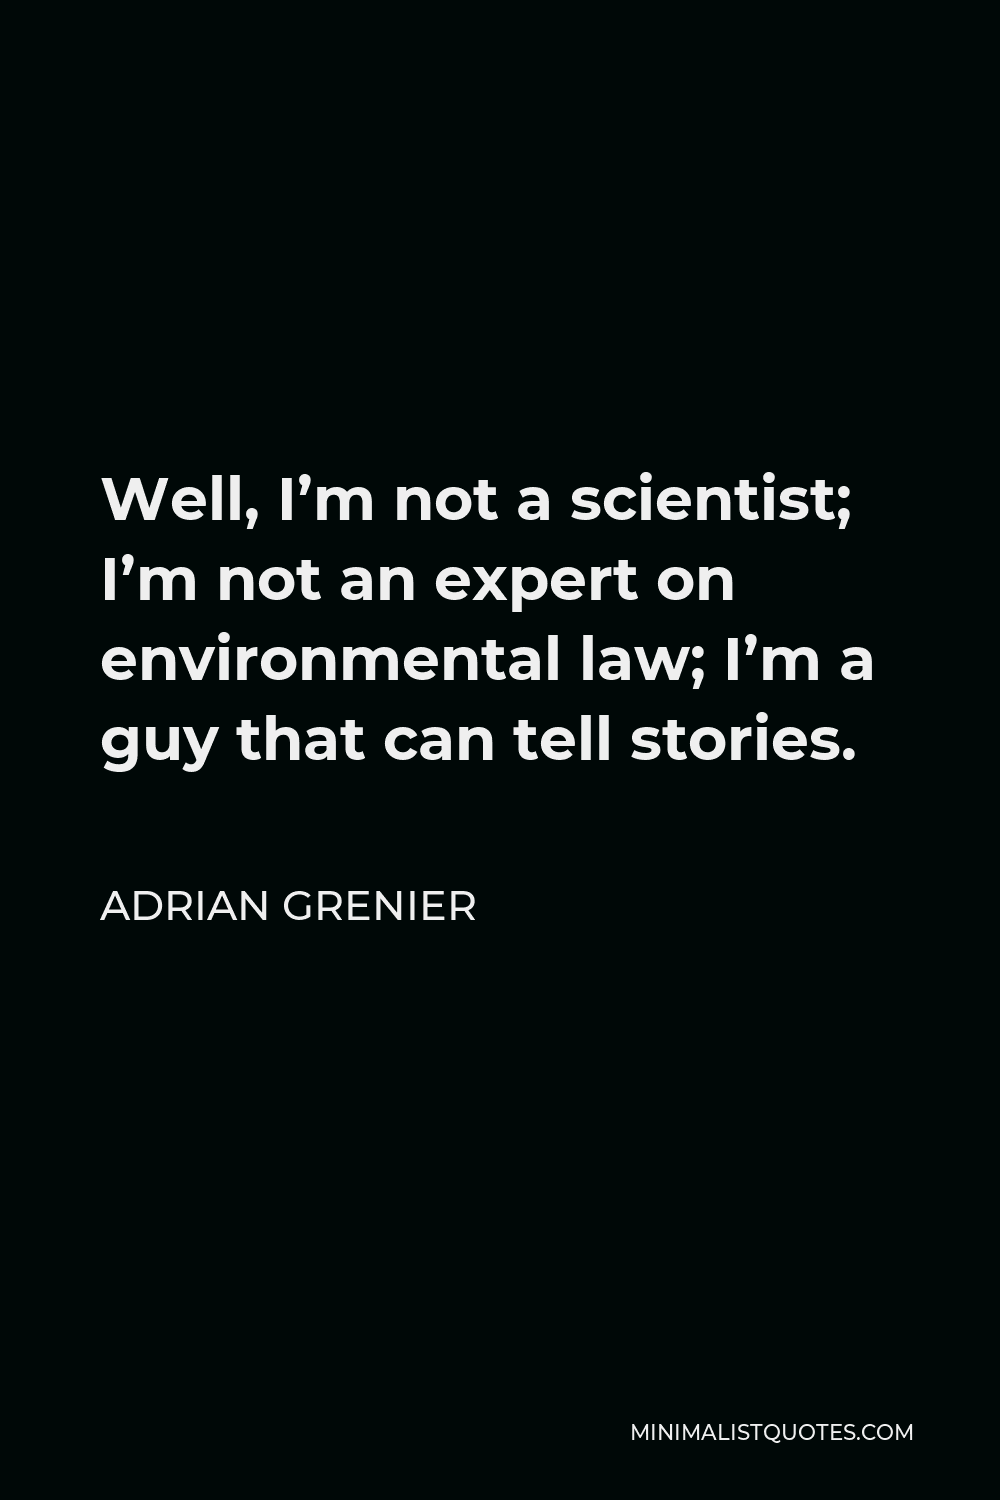 Adrian Grenier Quote - Well, I’m not a scientist; I’m not an expert on environmental law; I’m a guy that can tell stories.